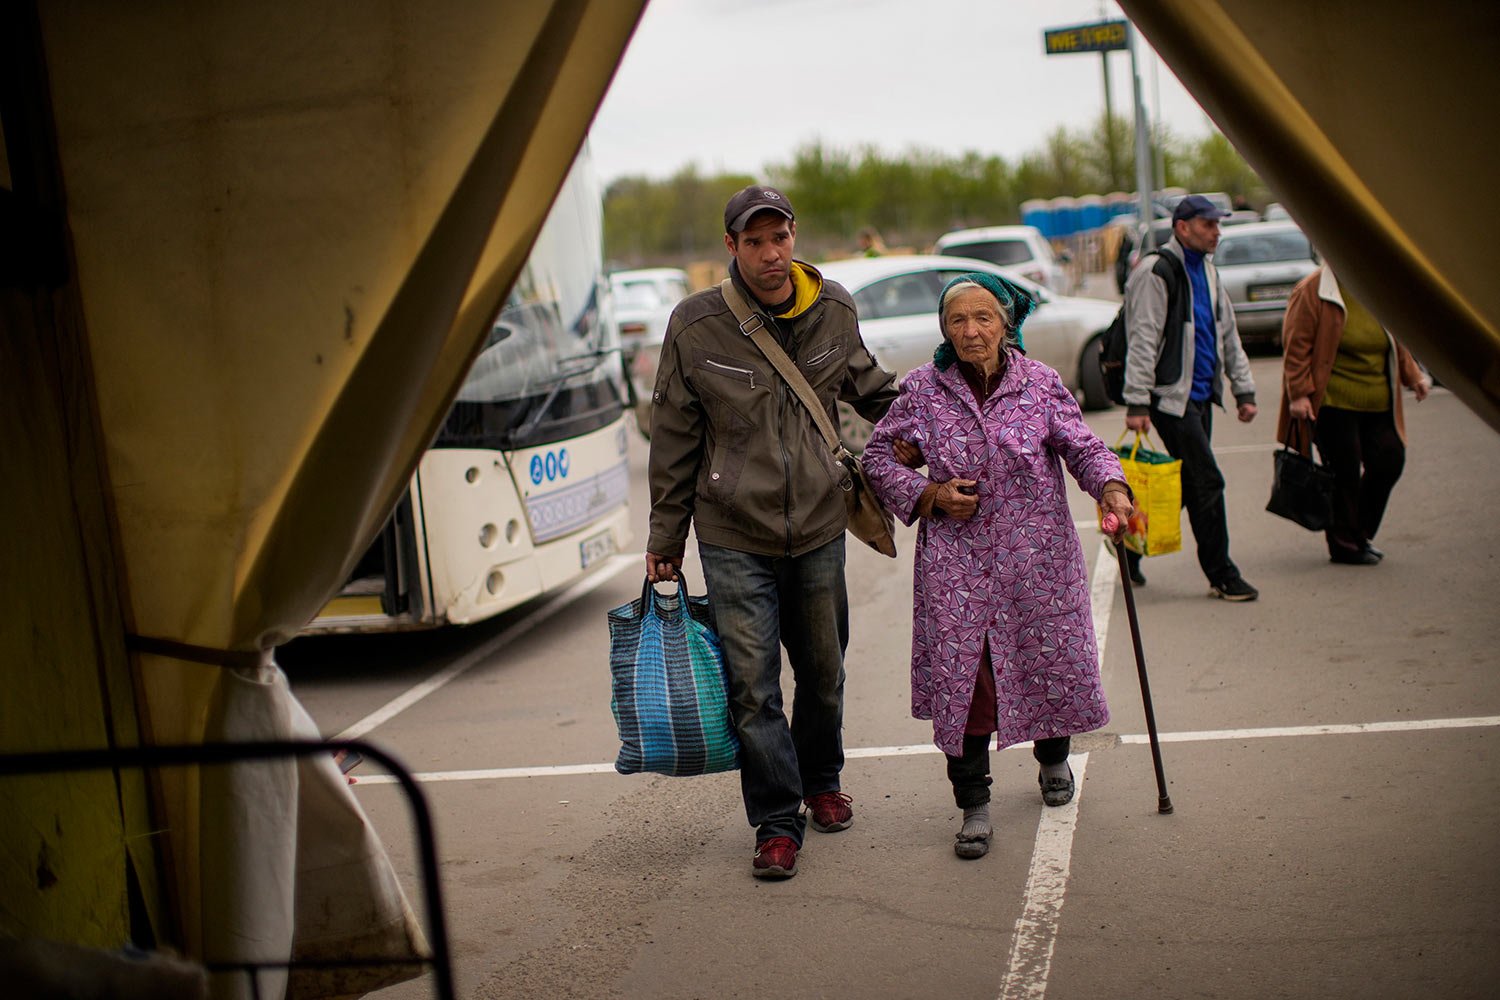  Kateryna Hodza, 85, and her grandson Artem Dorschenko arrive at a reception center for displaced people in Zaporizhzhia, Ukraine, Friday, April 29, 2022. (AP Photo/Francisco Seco) 